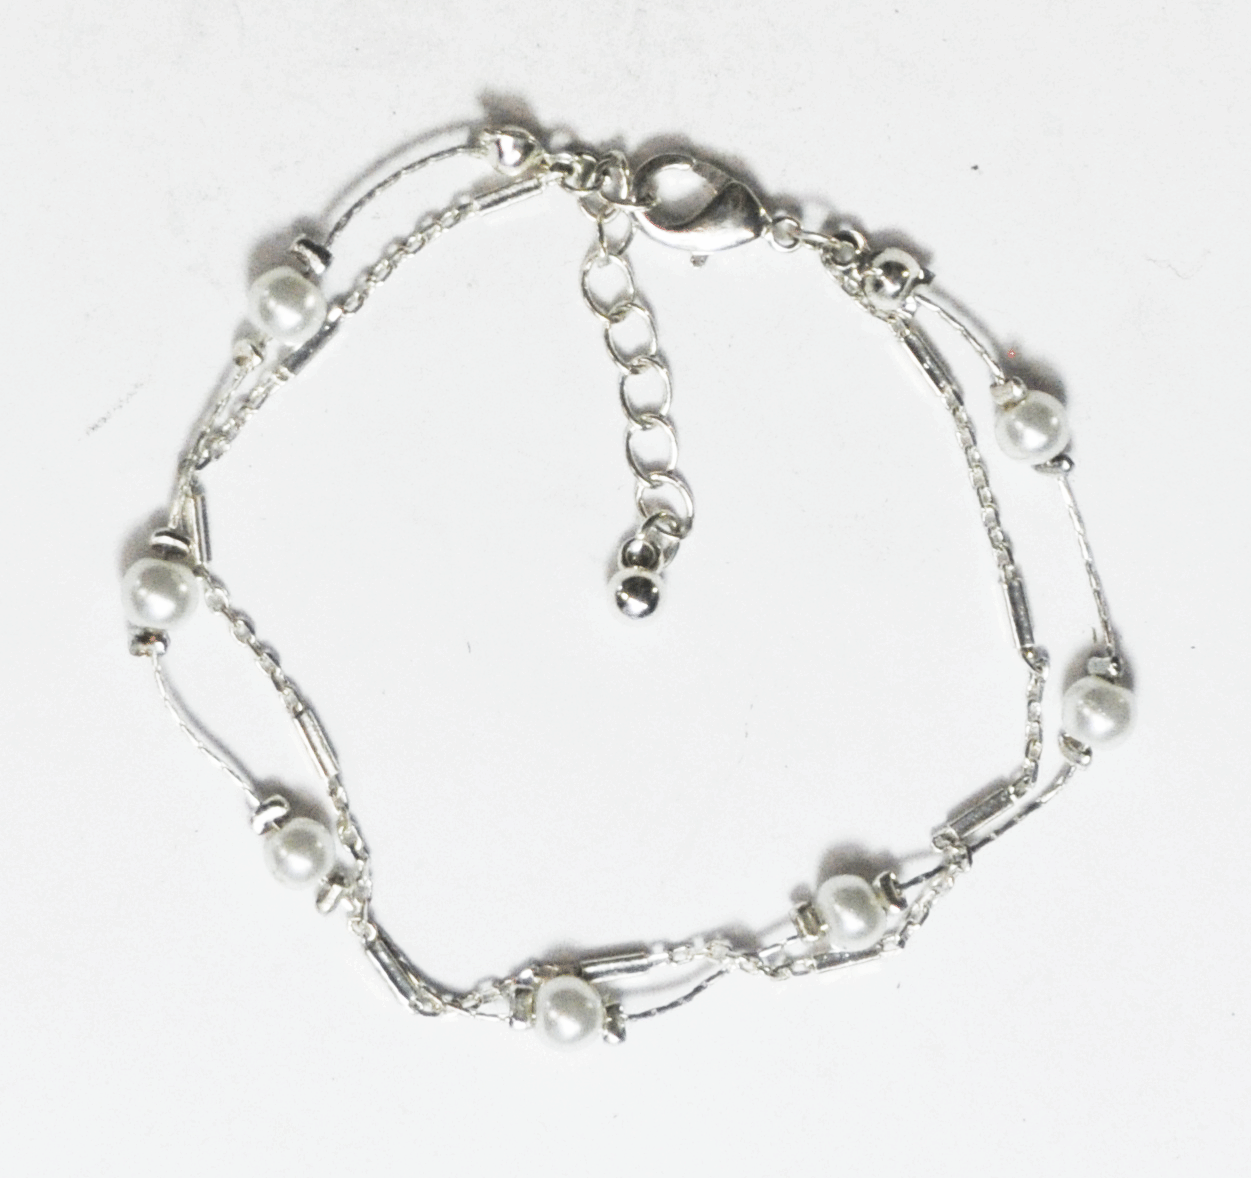 Silver Plated Faux Pearl 2 Strand Sizable Ball End Bracelet 8.5"